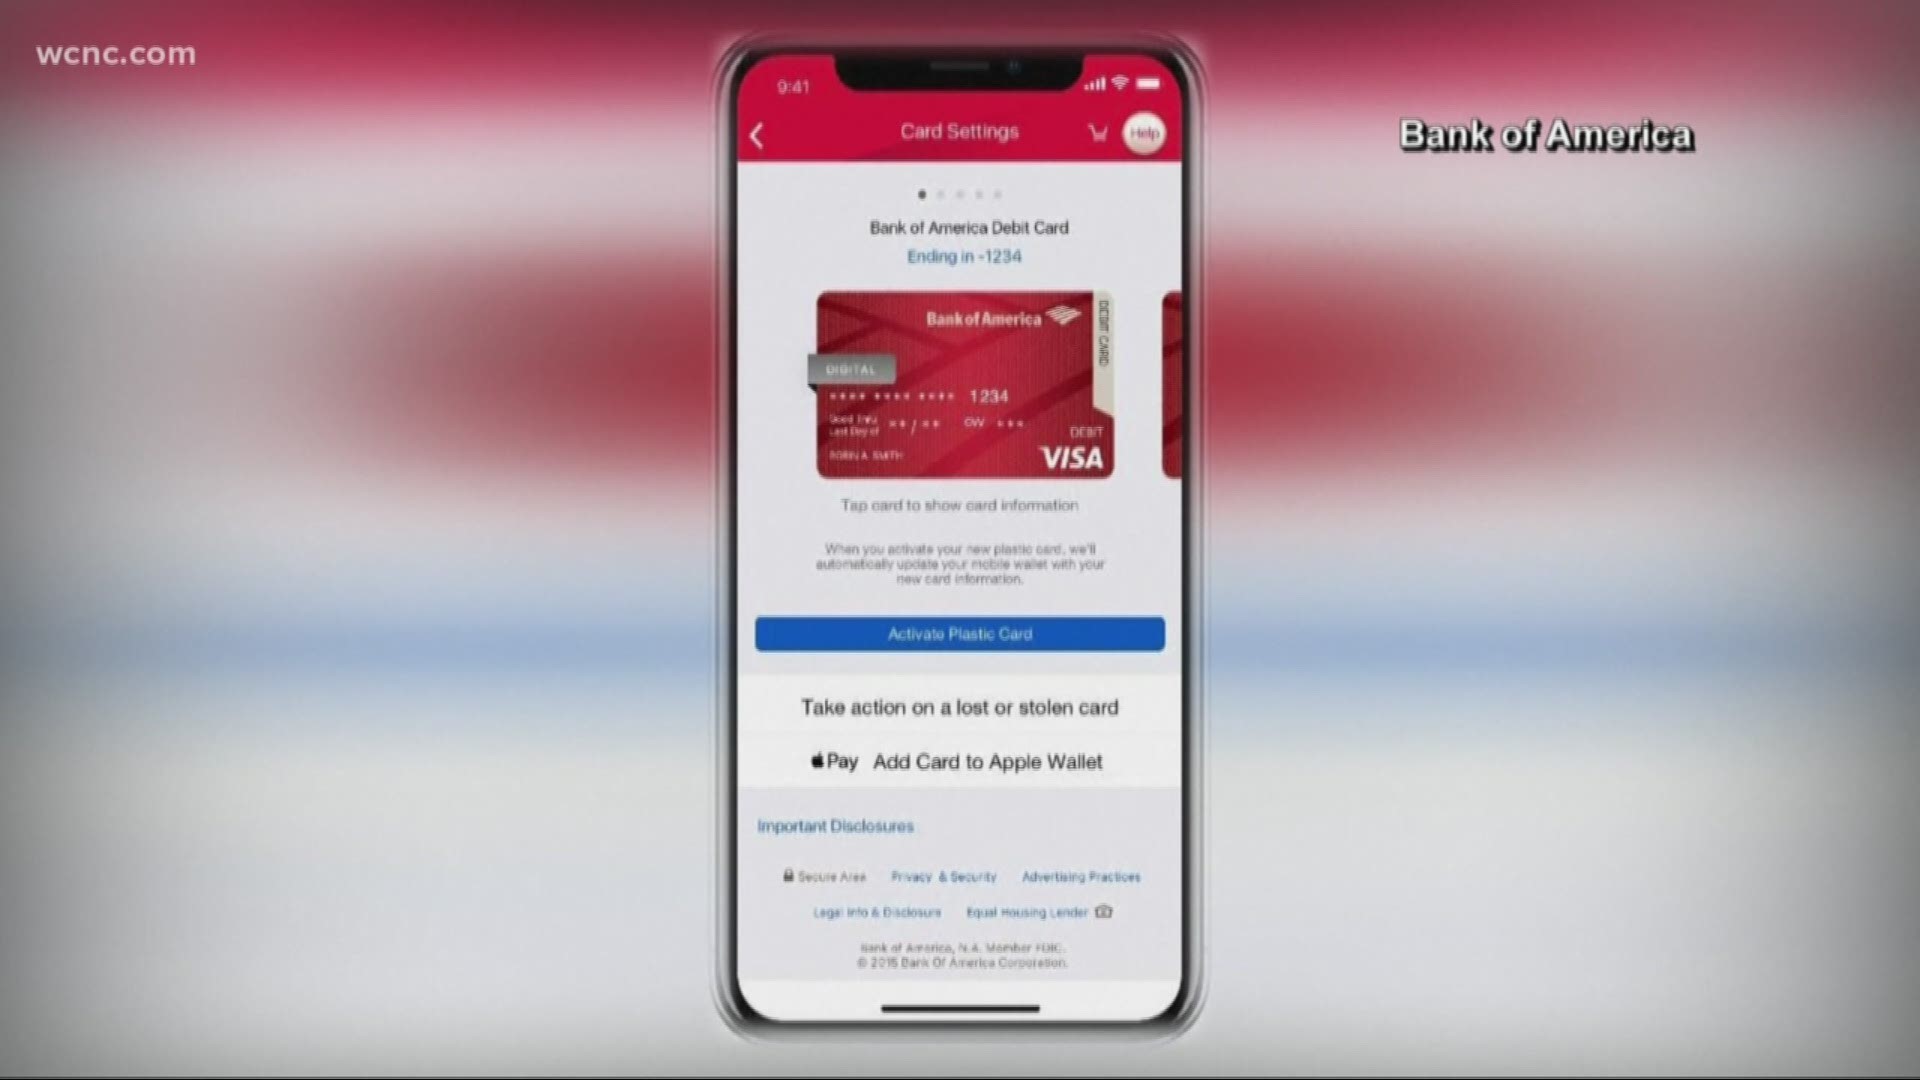 apply for a bank of america debit card online